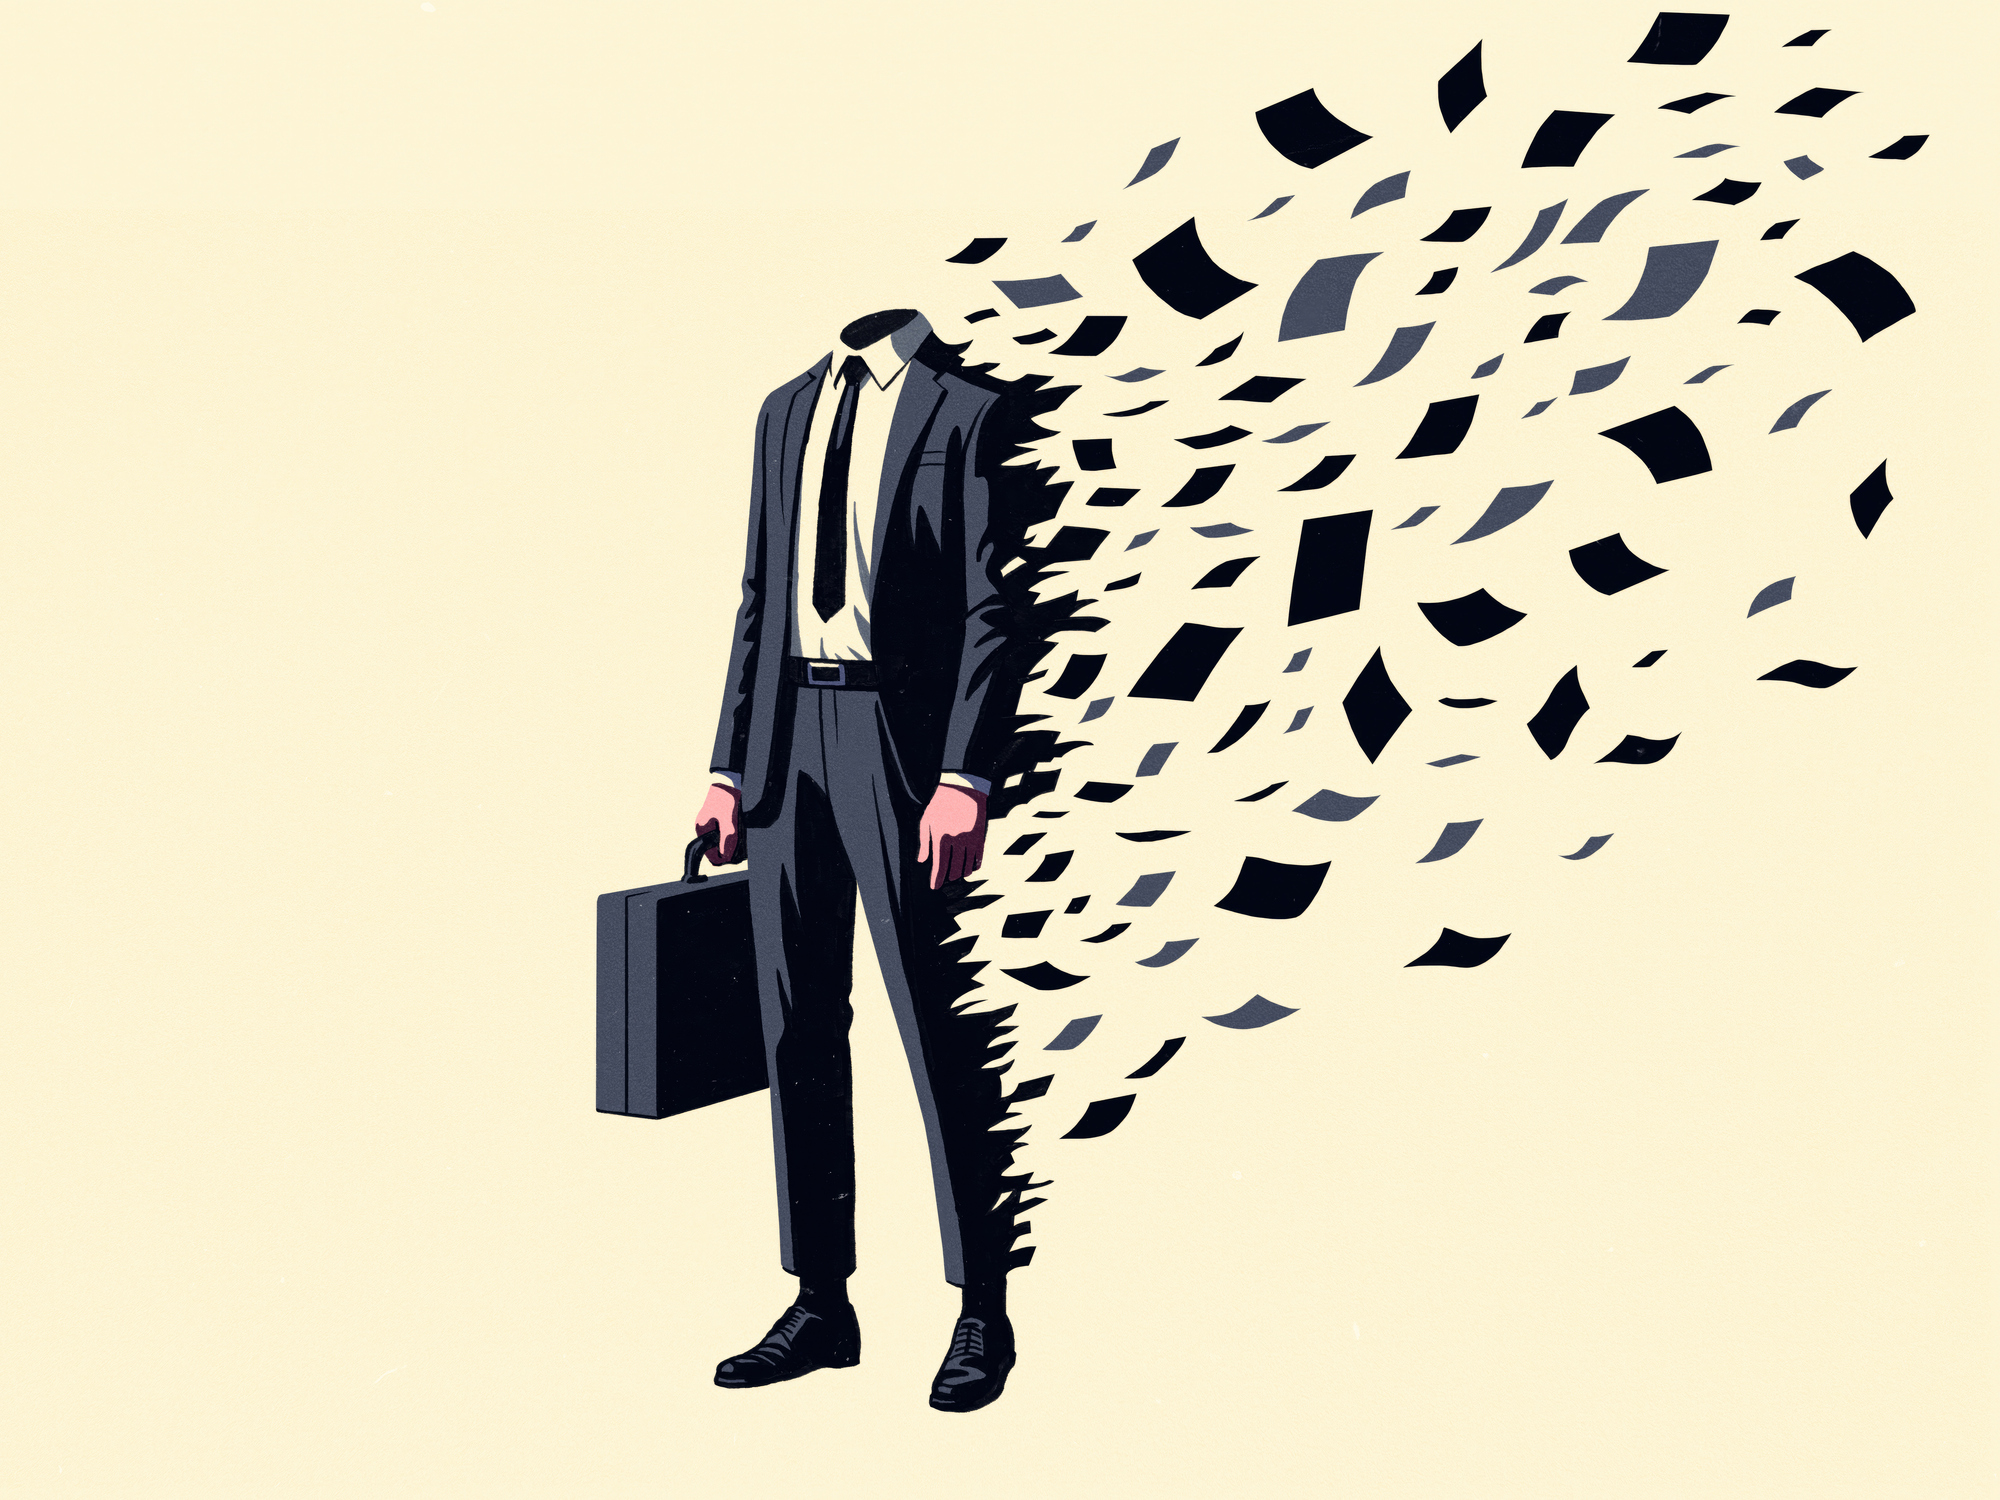 Man in business suit disintegrating into a flurry of papers